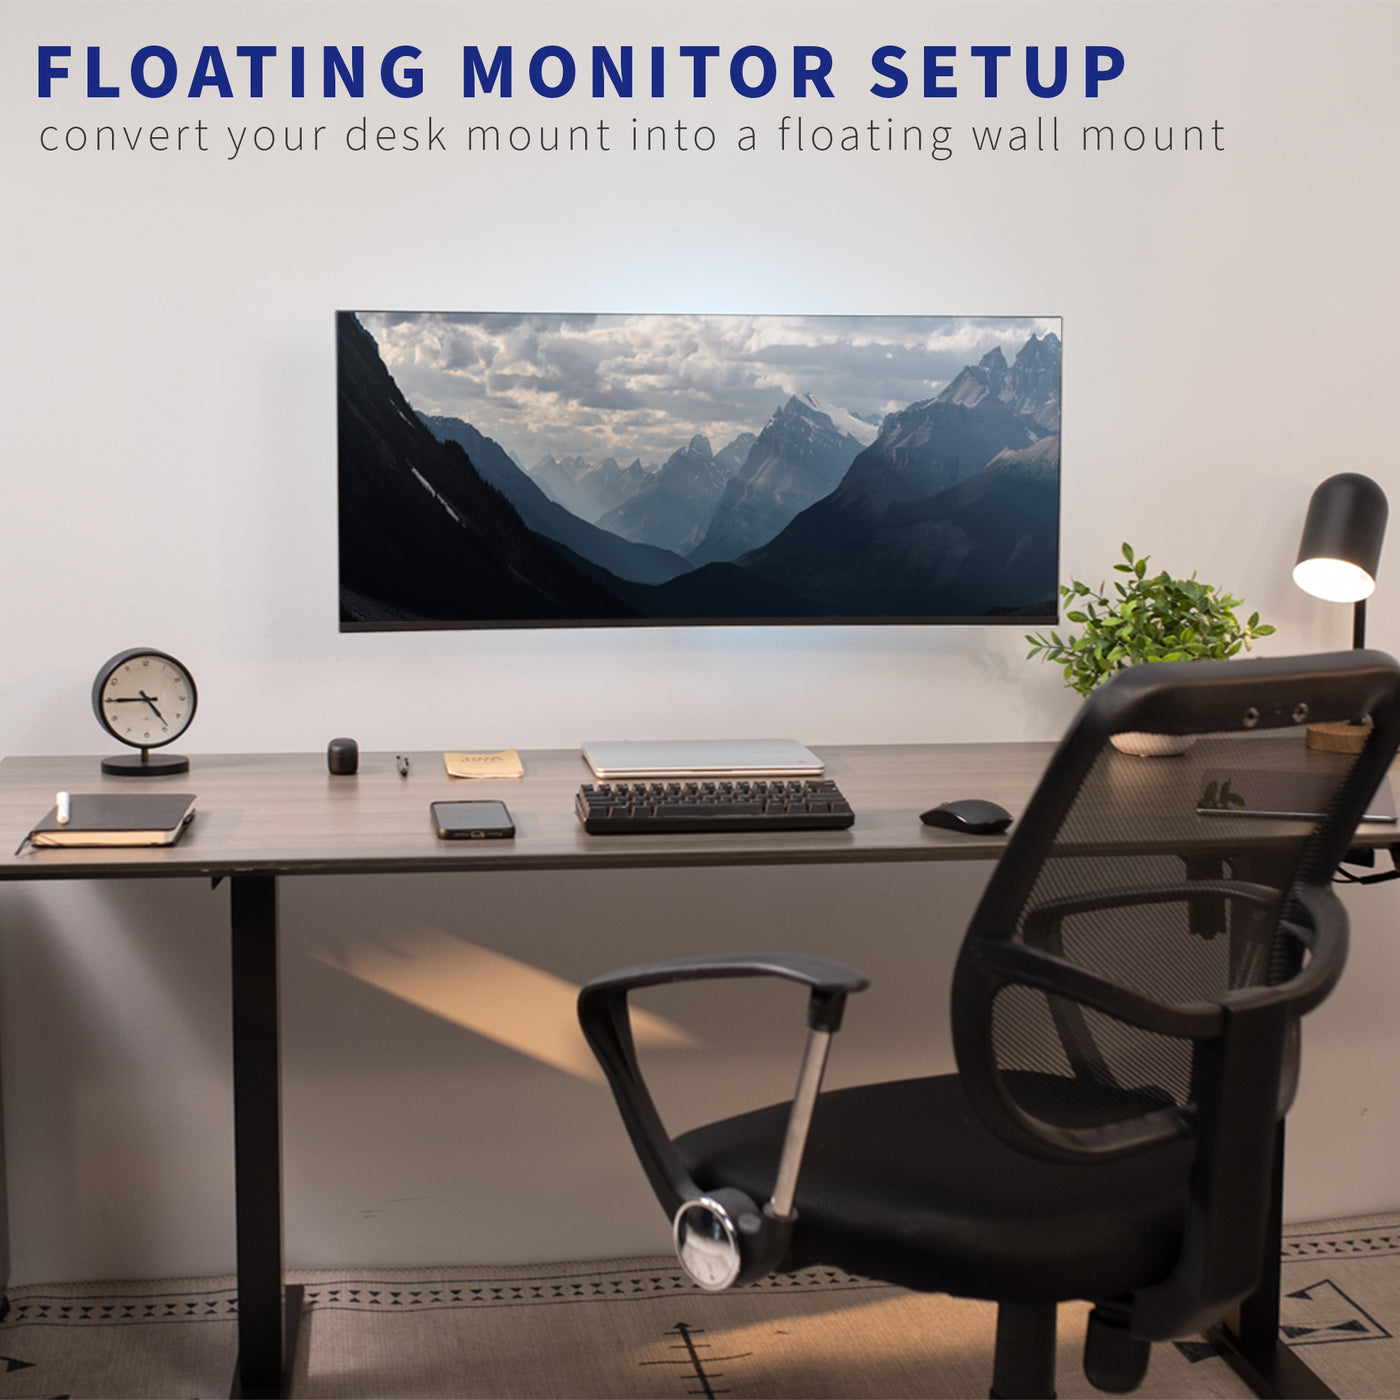 Floating monitor set up to modernize your office space.